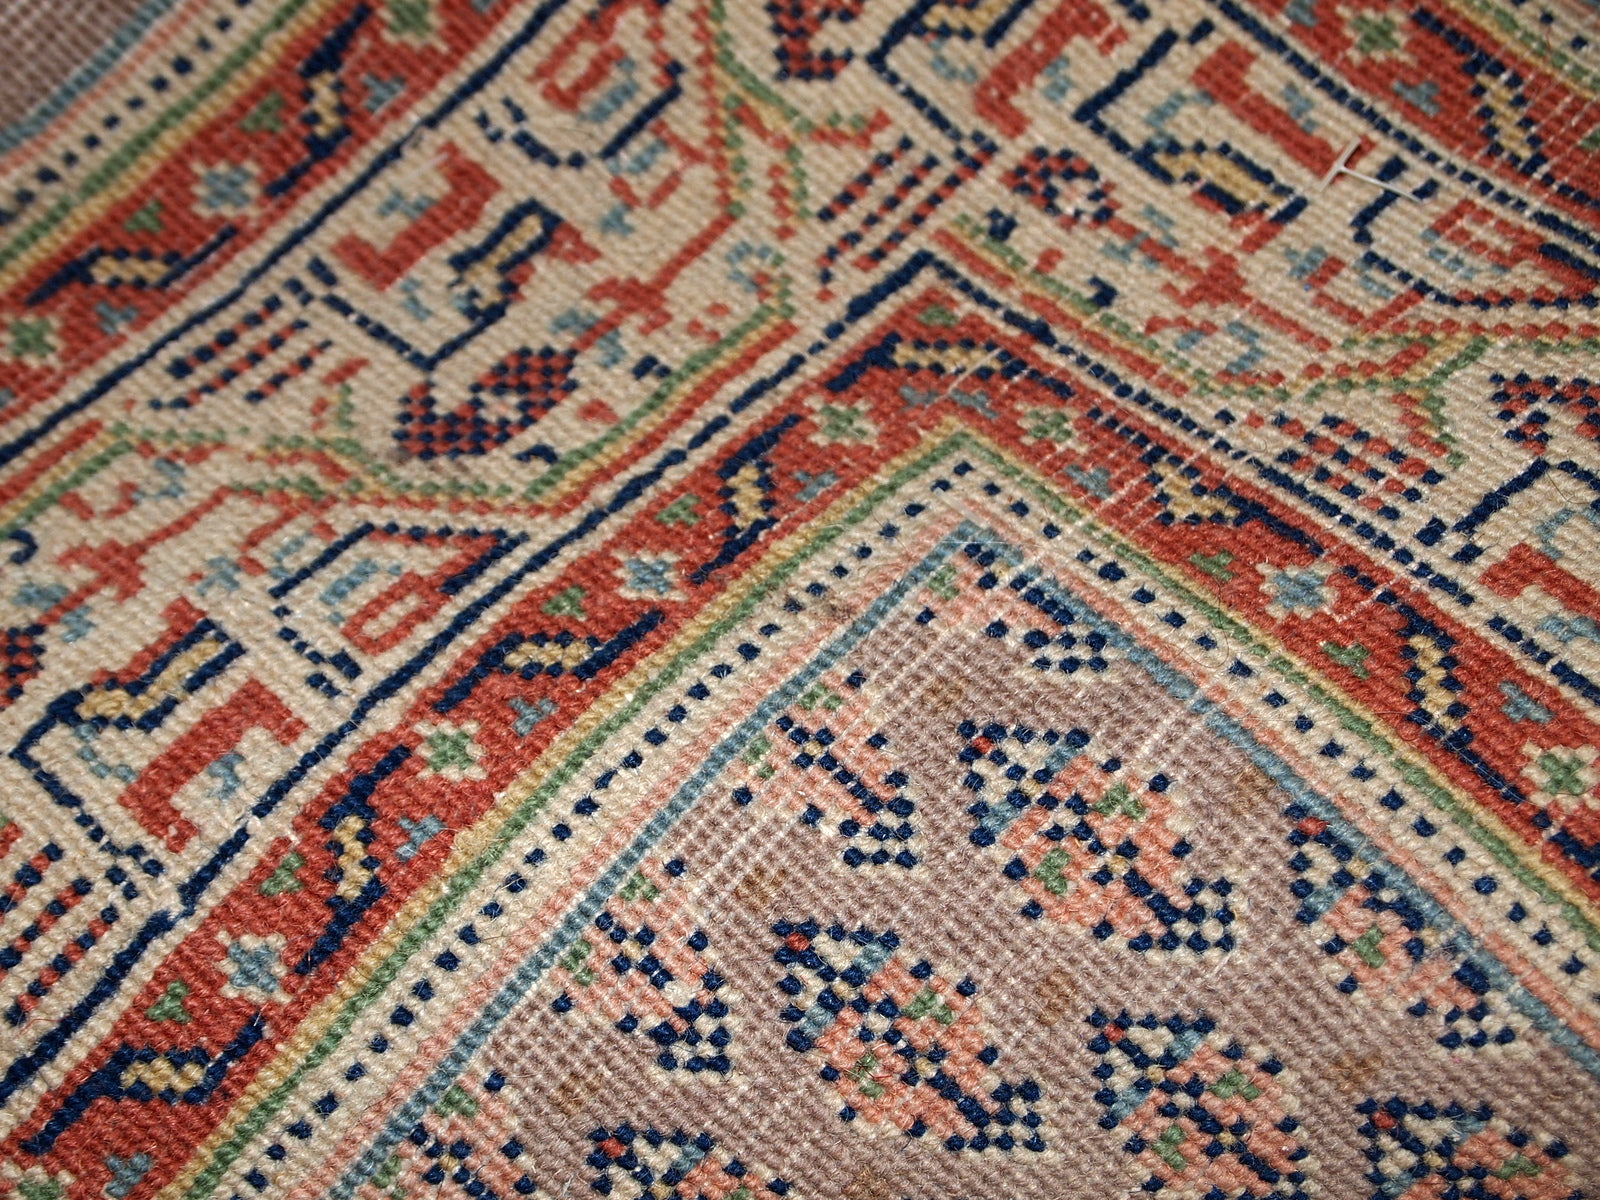 Handmade vintage Indian Seraband runner in original condition, it has some age discolorations. The rug is from the end of 20th century.